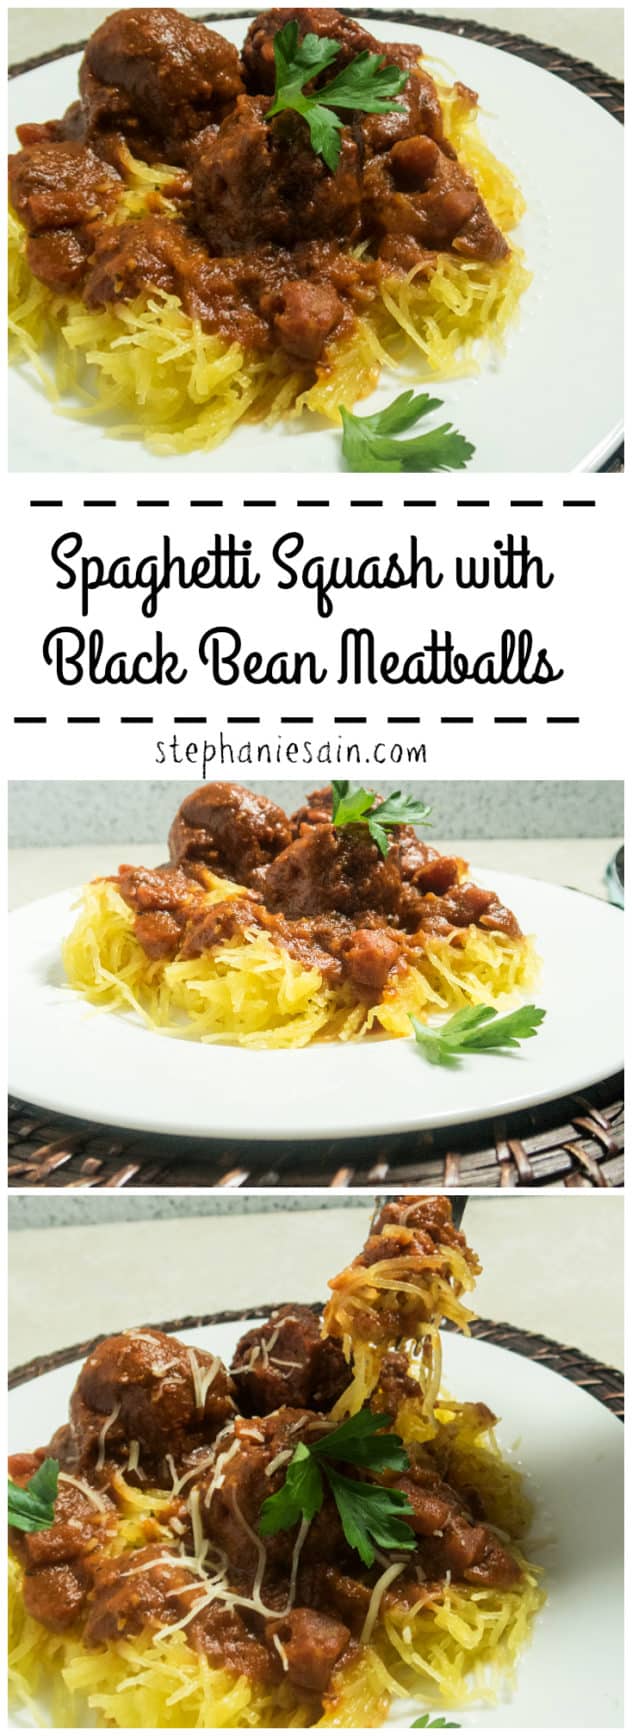 Spaghetti Squash with Black Bean Meatballs is a healthier, tasty version for spaghetti & meatballs. Lower carb, Vegan, and Gluten Free.